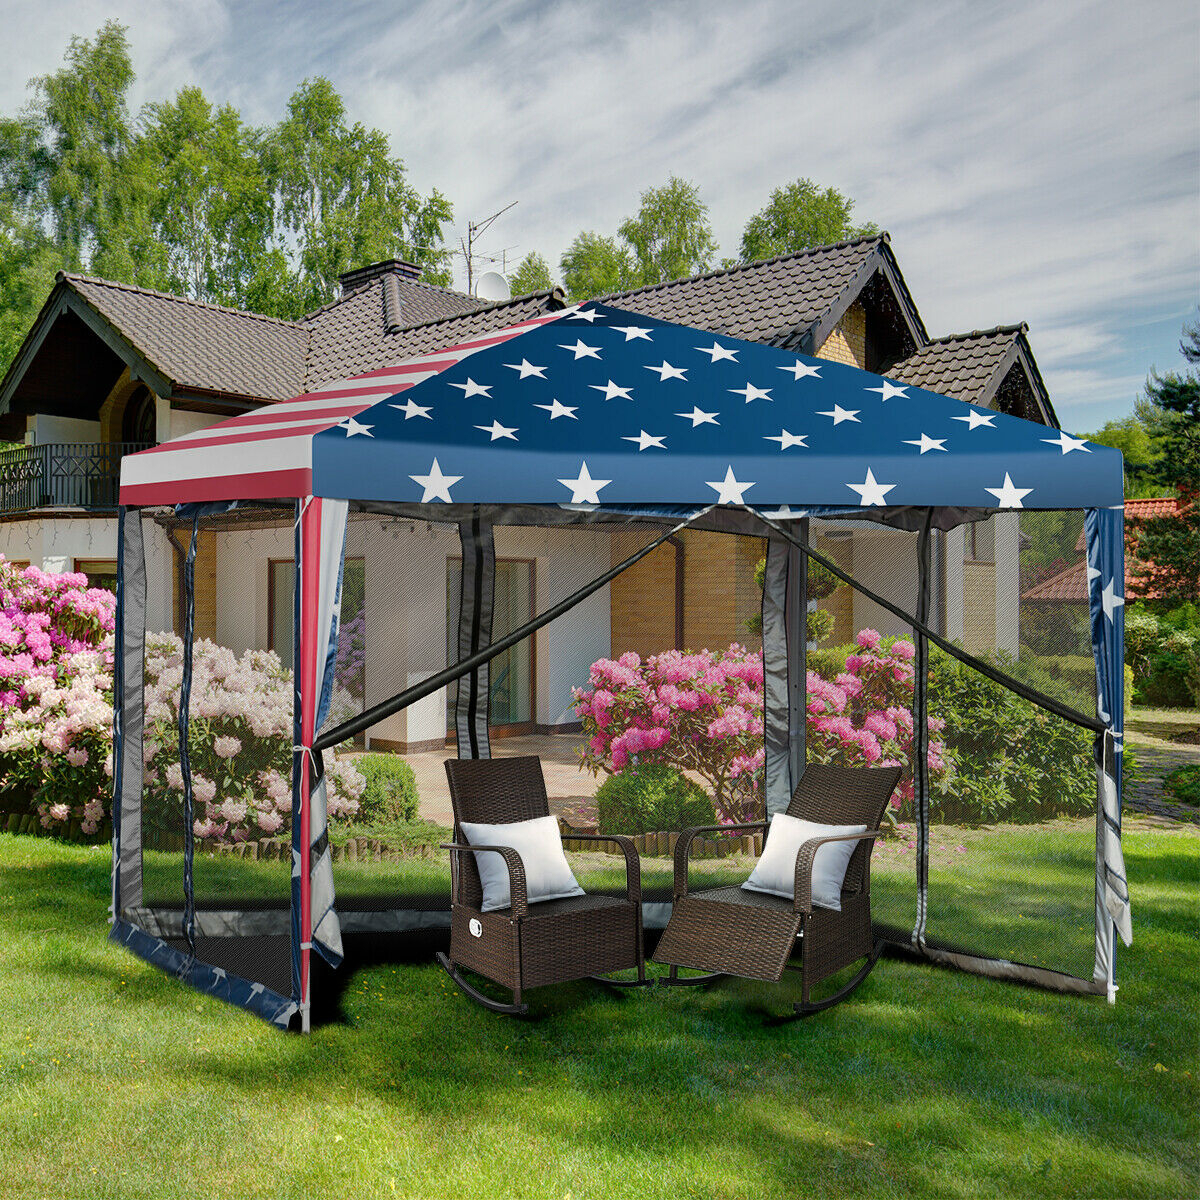 10' X 10' Outdoor Pop-up Canopy Tent W/ Mesh Sidewalls Carrying Bag